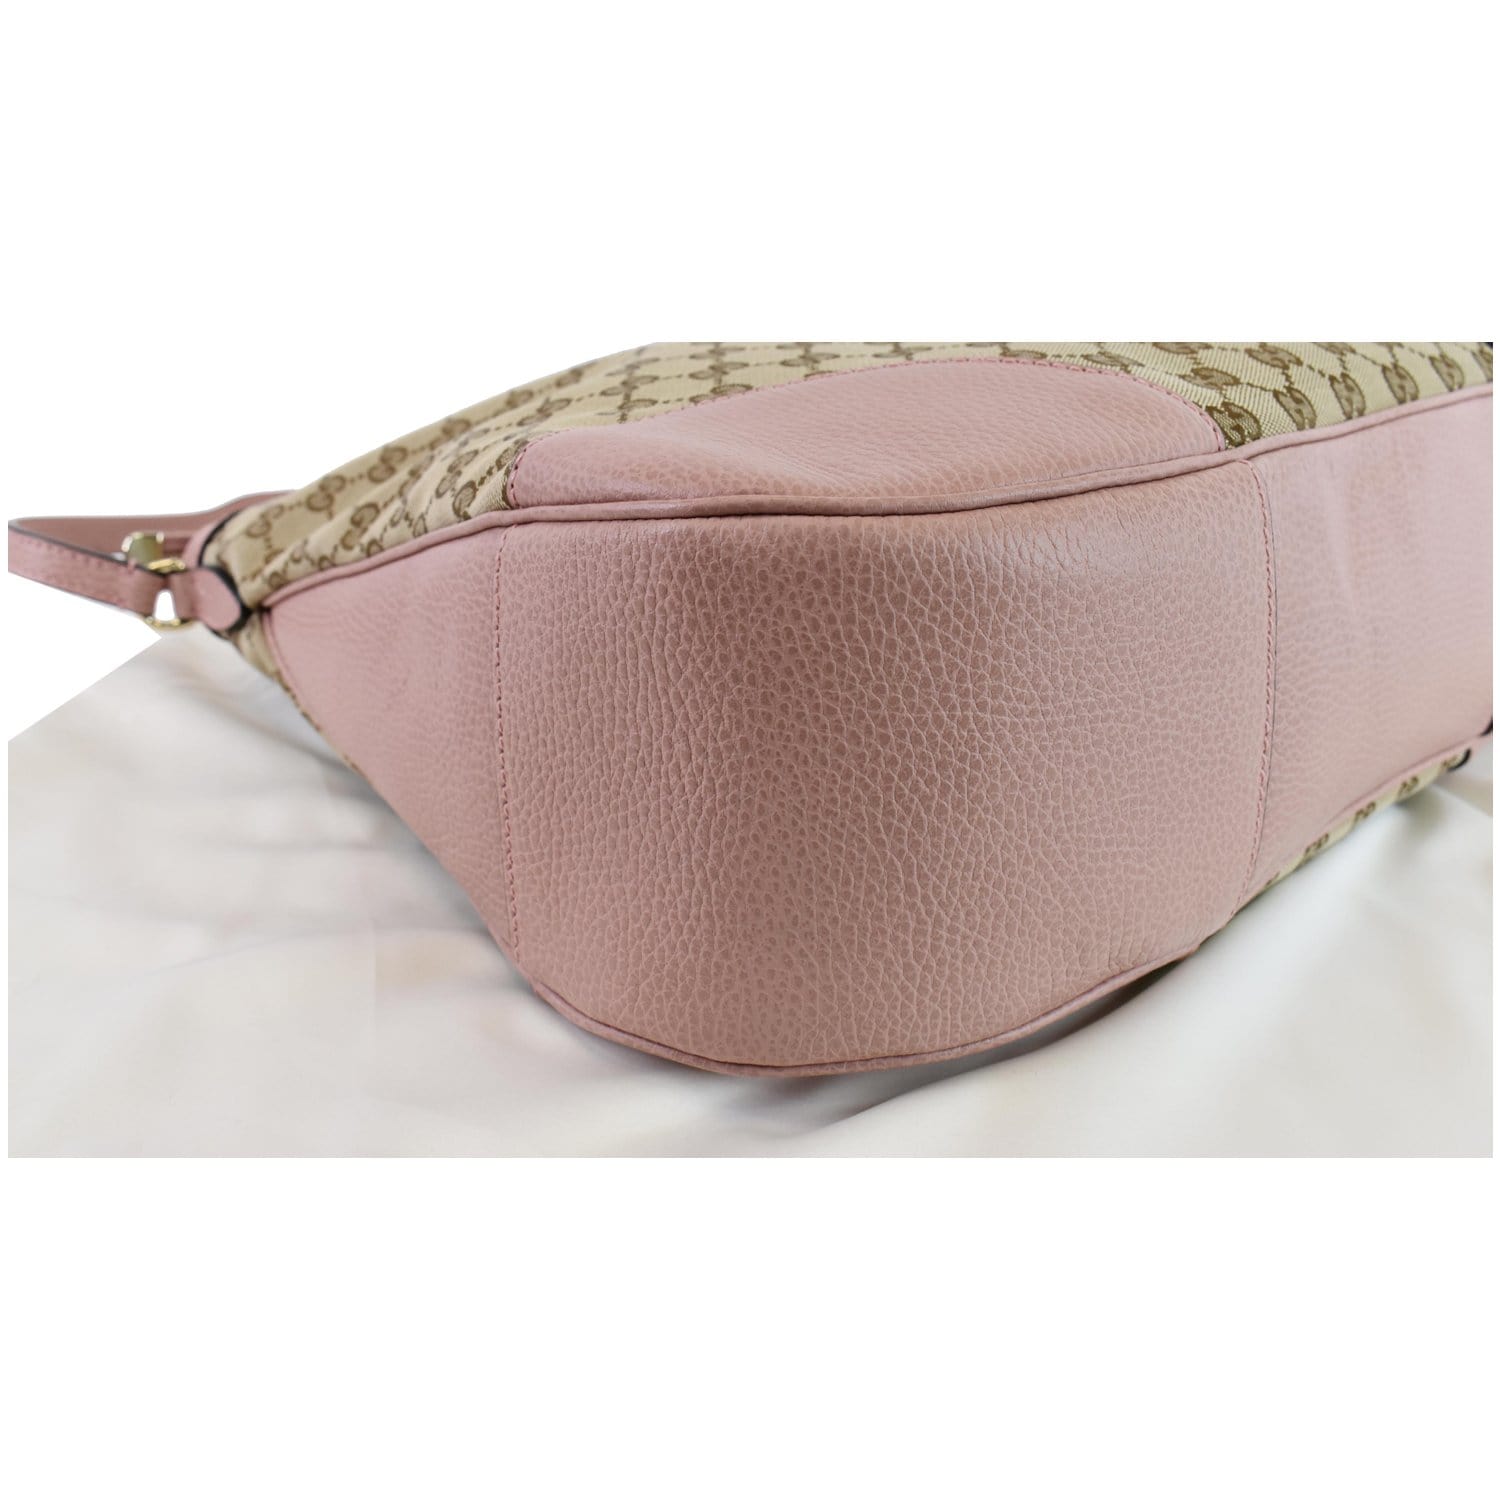 New Authentic Gucci 449244 Large Bree Original Gg Canvas & Leather Hobo  Pink